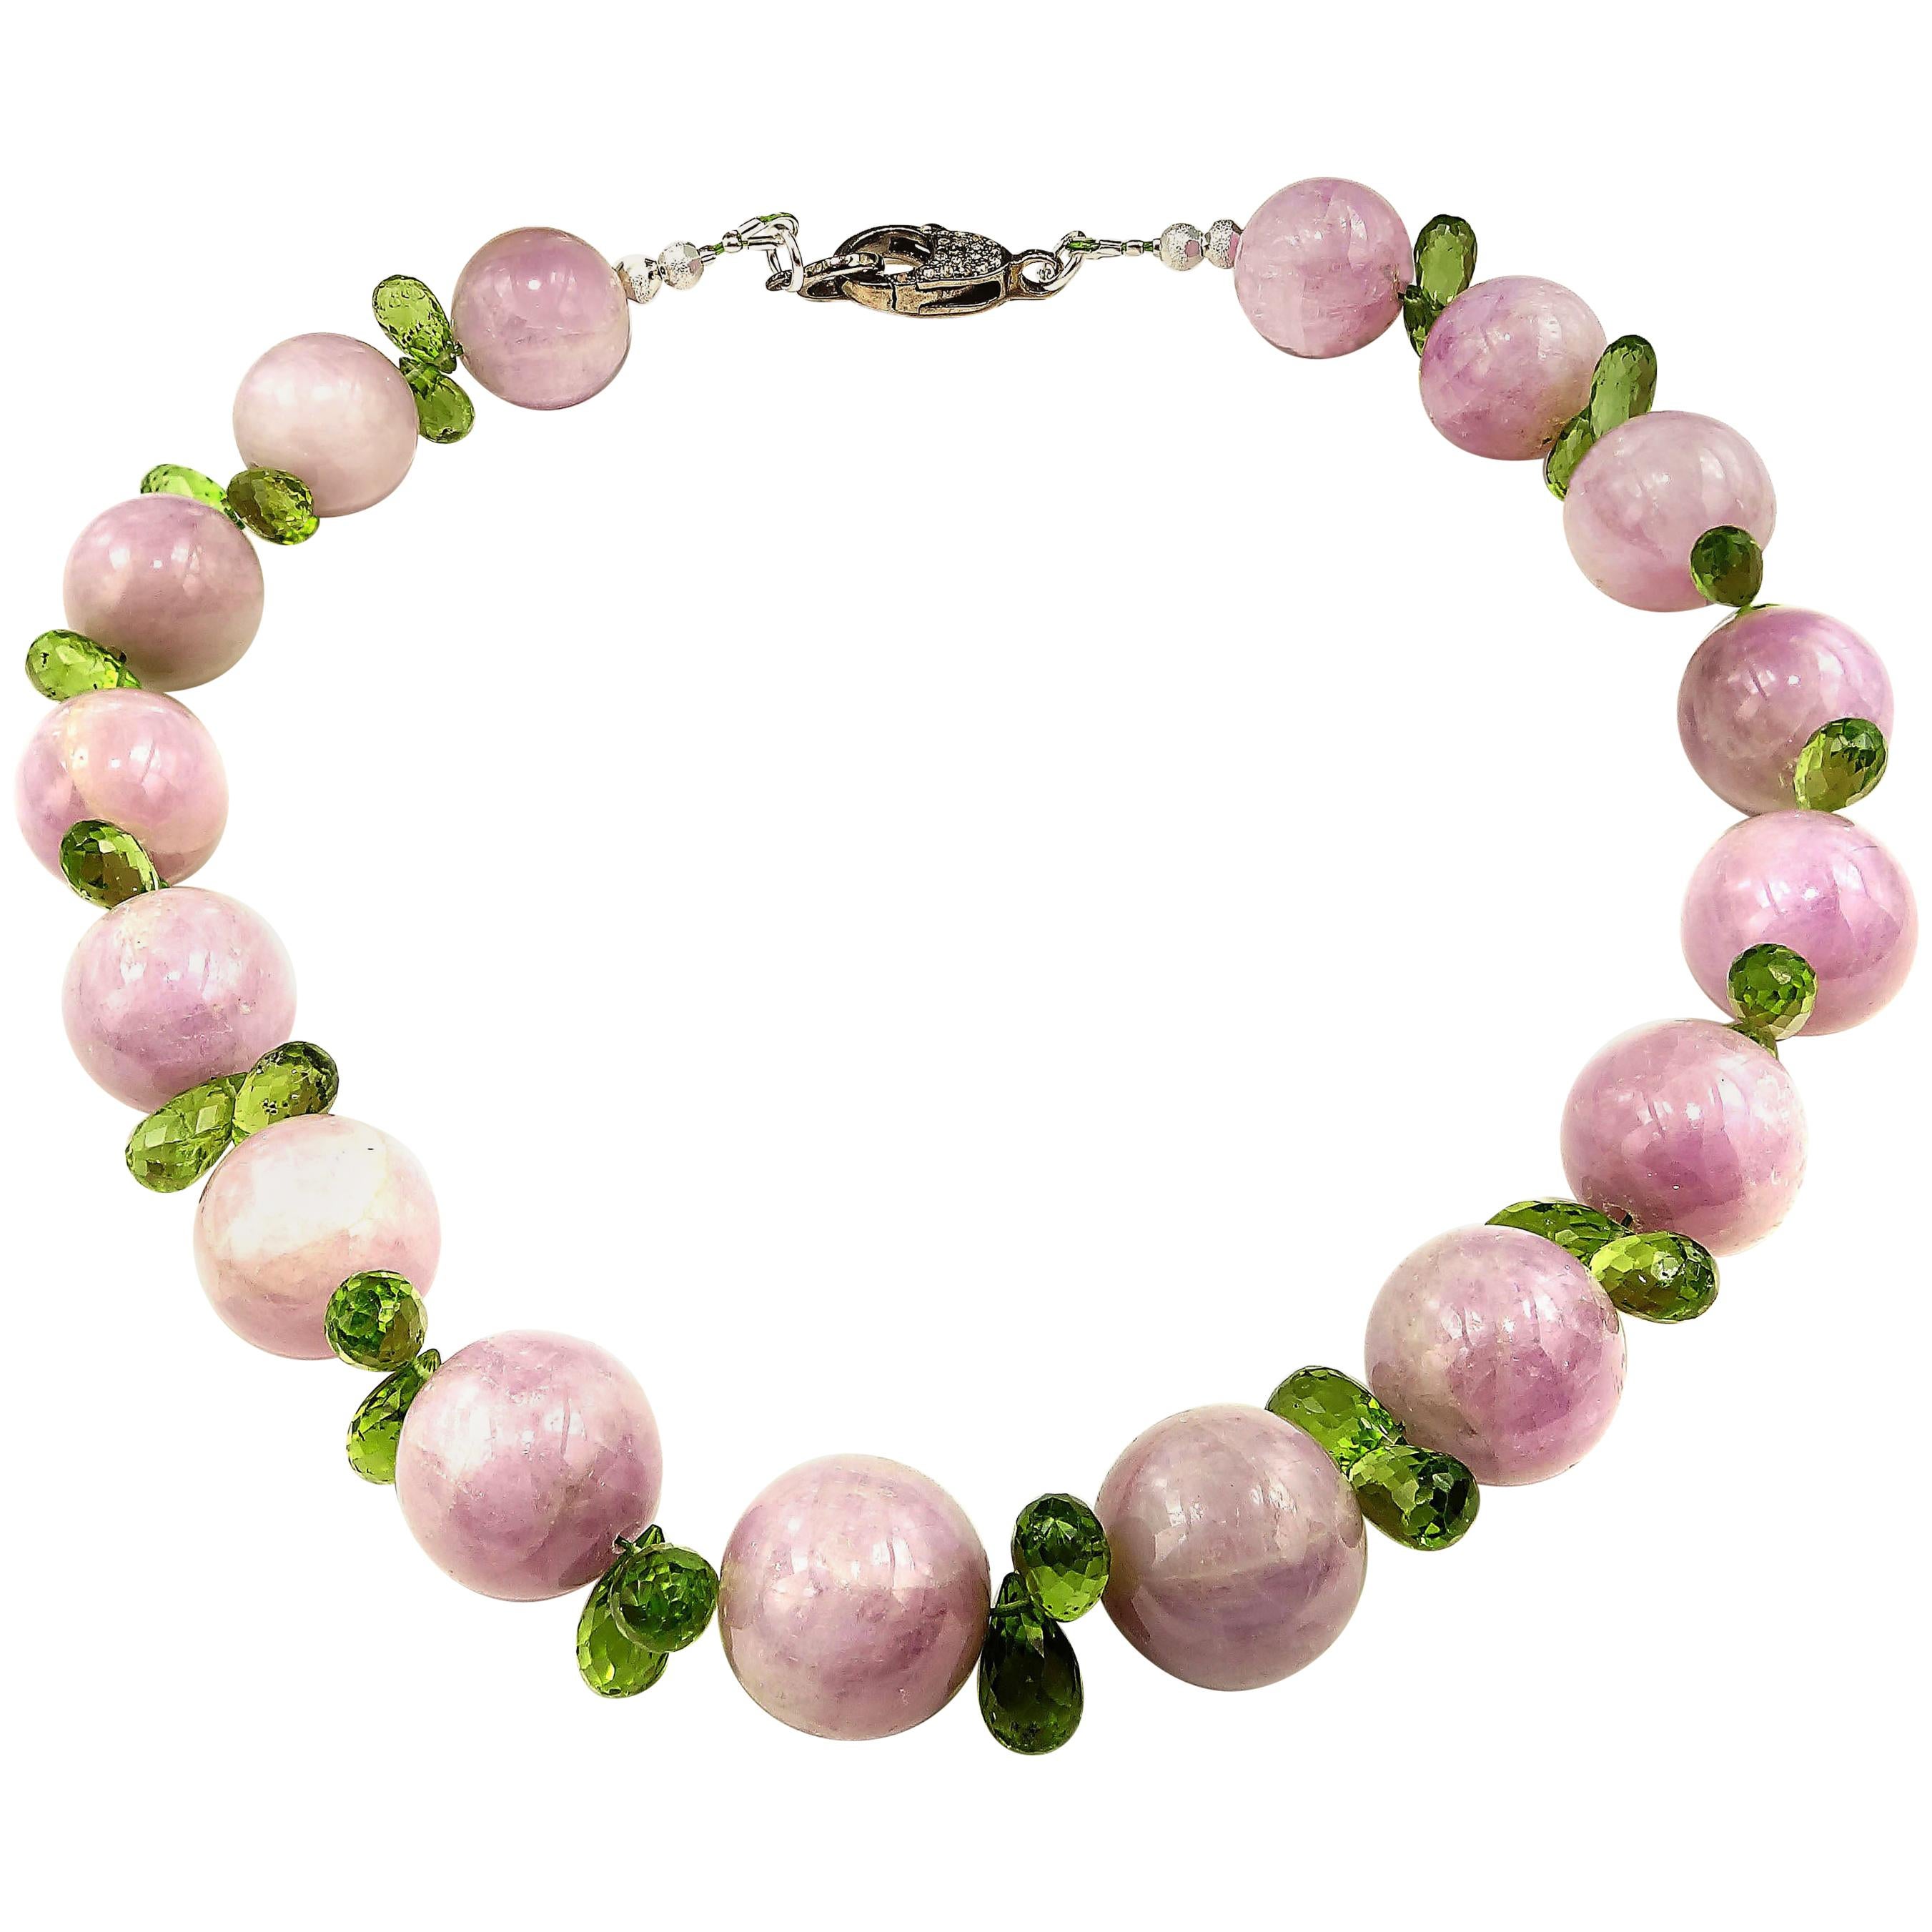 15 Inch choker necklace of glowing opaque Kunzite and sparkling Peridot briolettes.  This unique, handmade choker plays the sparkling bright green of the Peridot off the glowing mauvy pink of the Kunzite to bring out the best of both gemstones. The